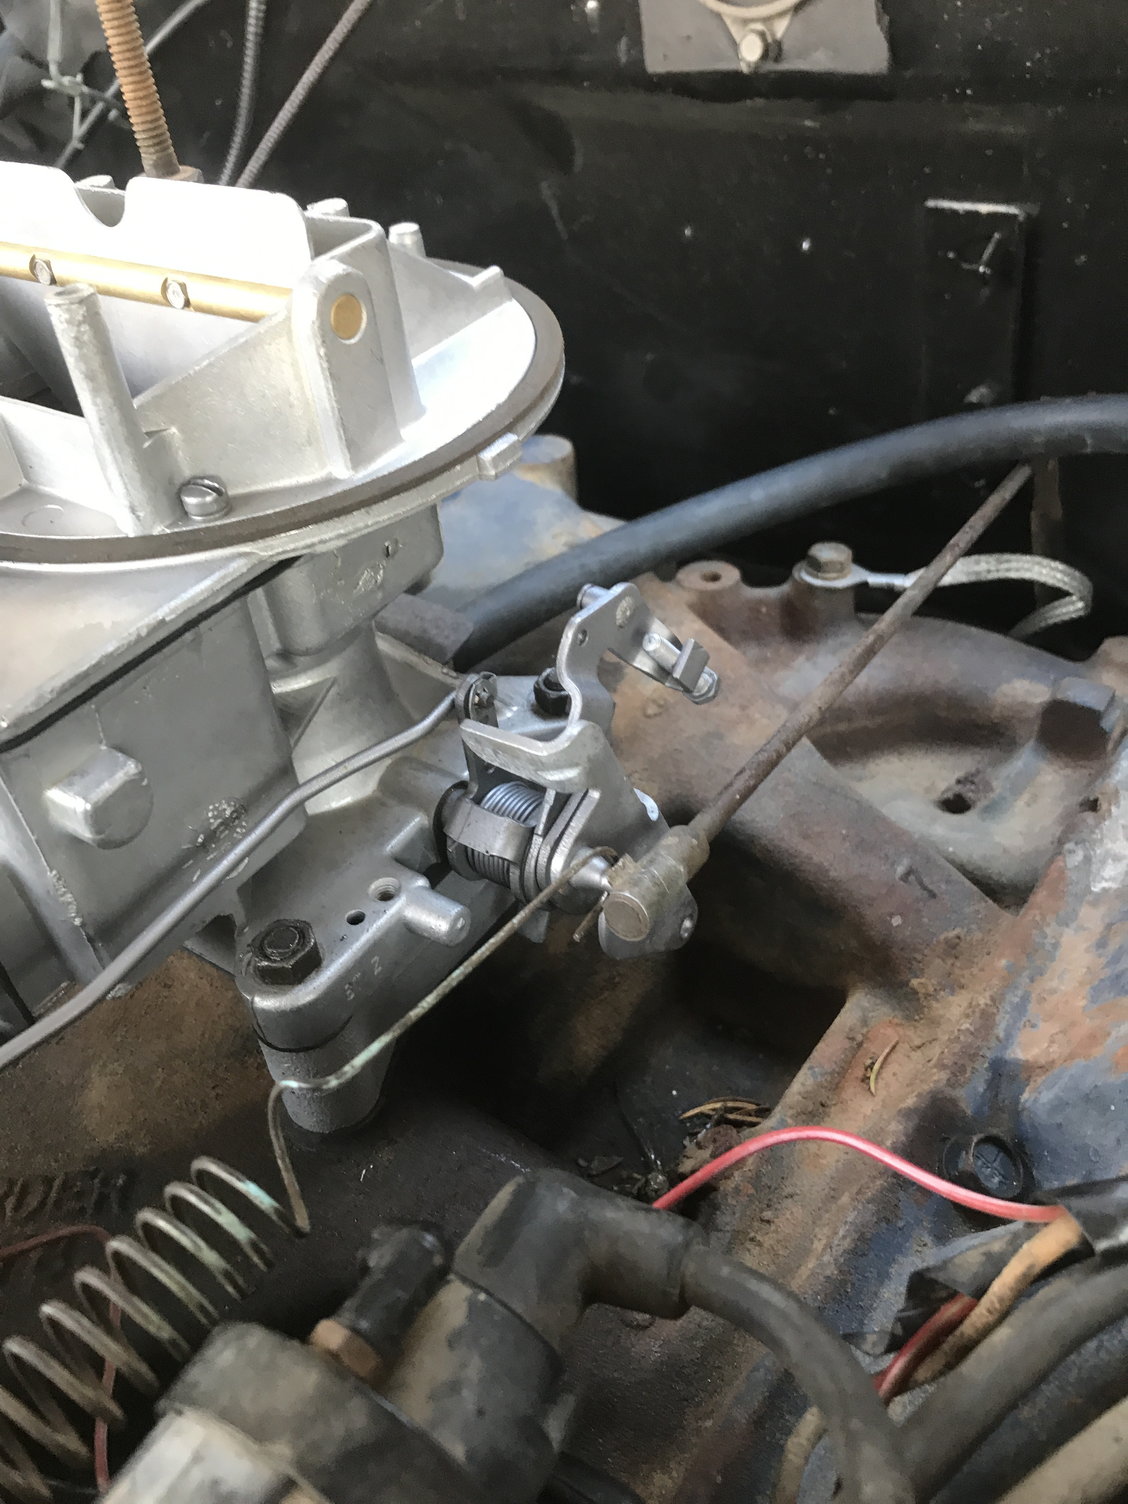 throttle return spring mount on carb ford truck enthusiasts forums throttle return spring mount on carb